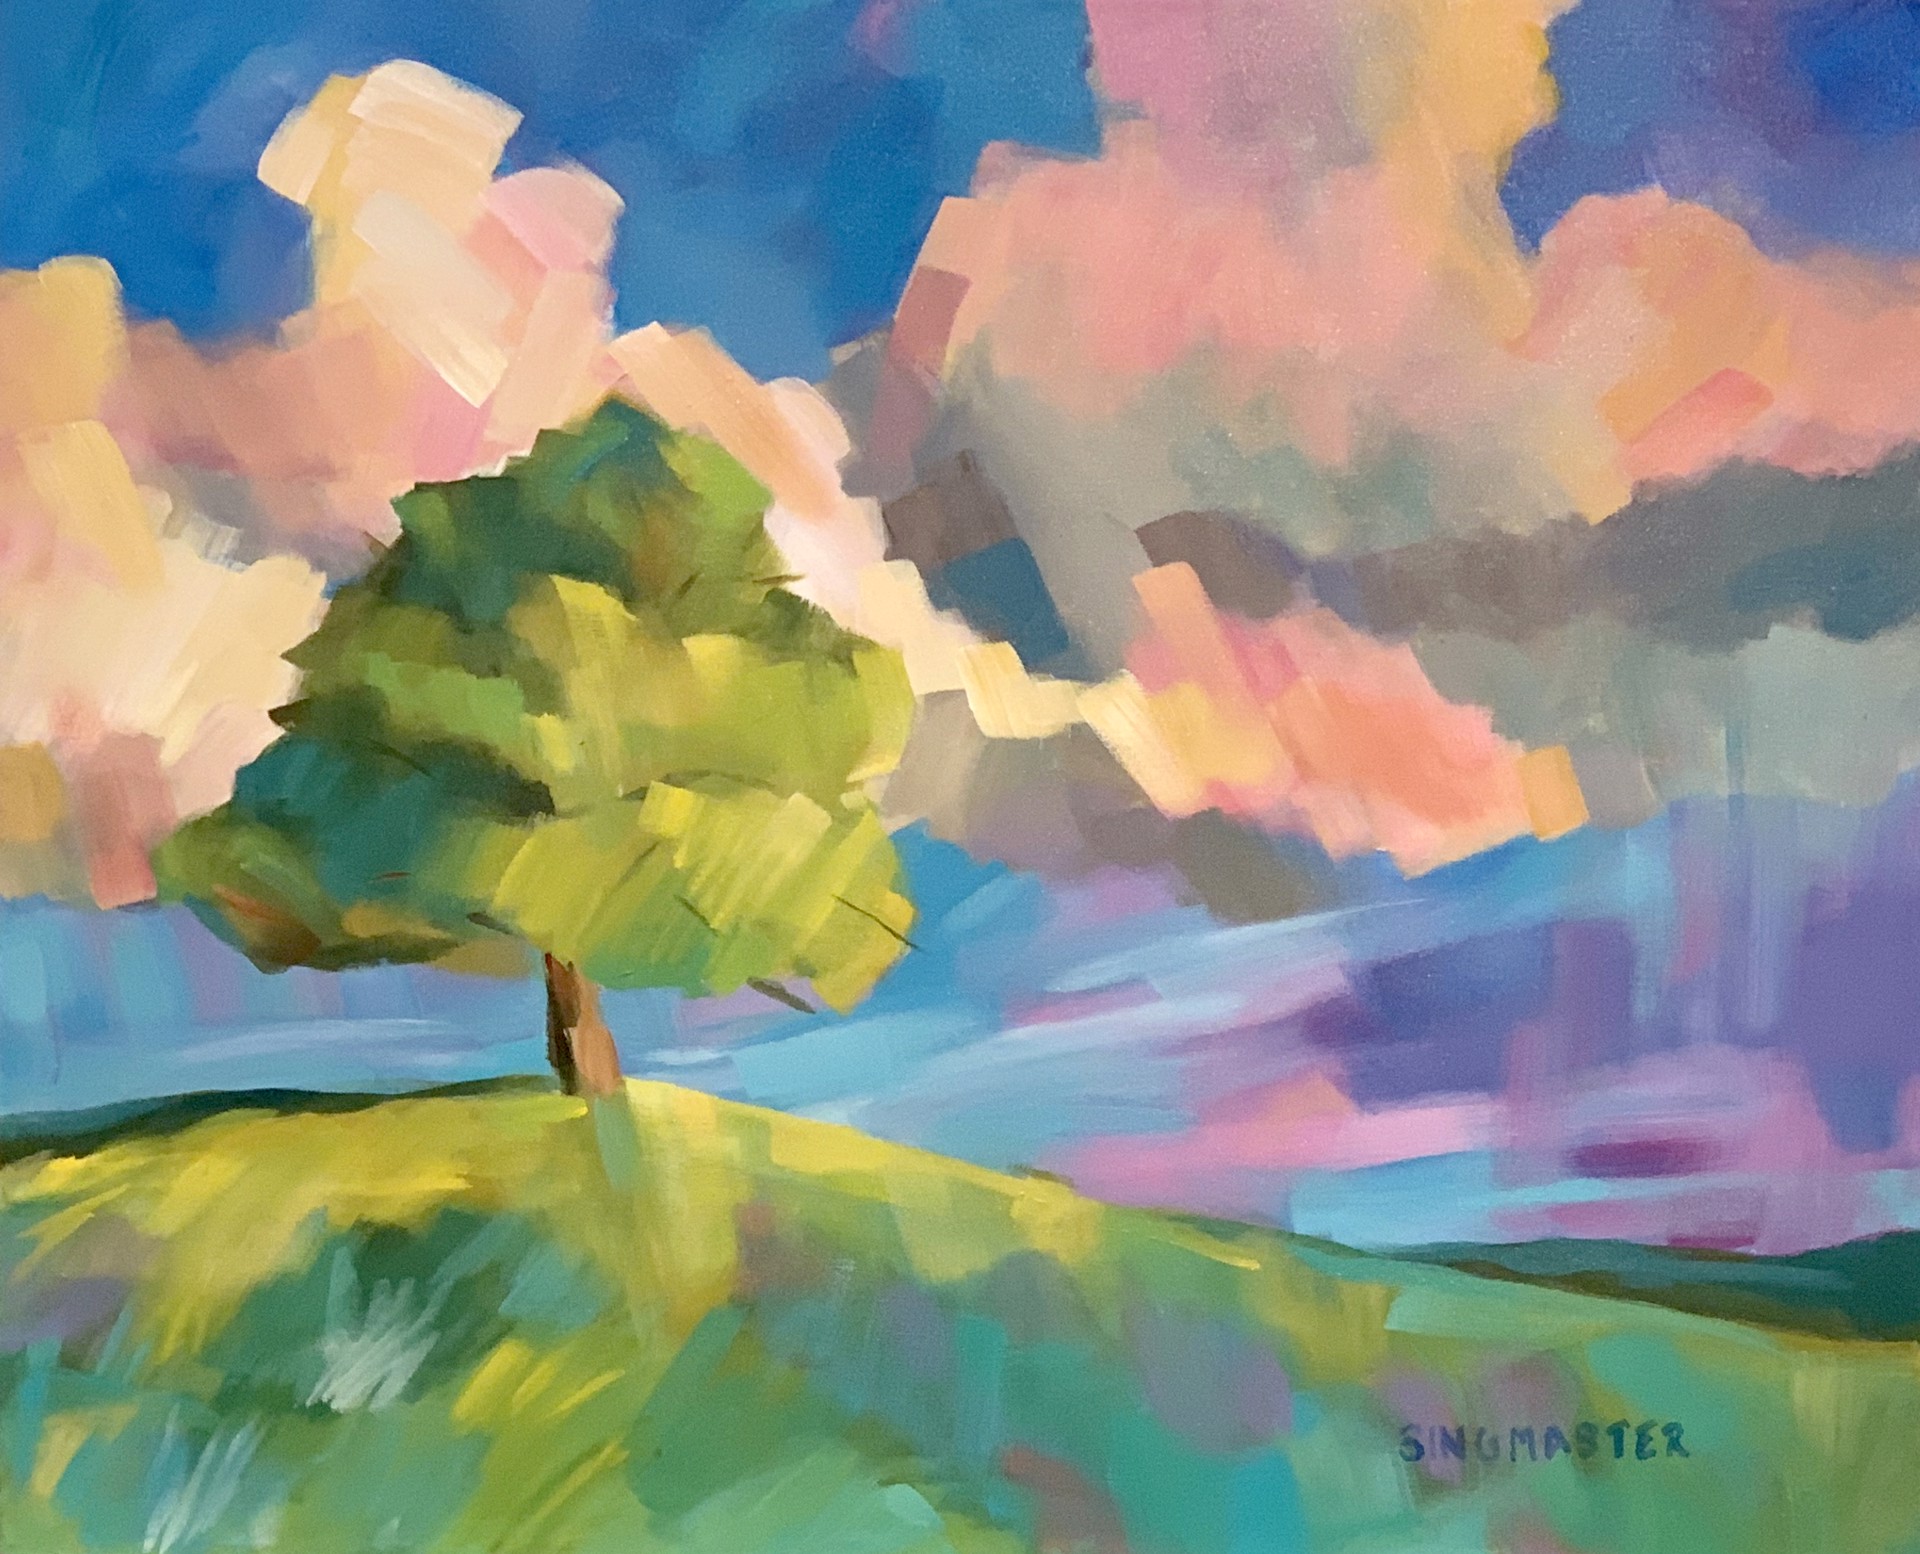 Tree Landscape by Kenneth Singmaster